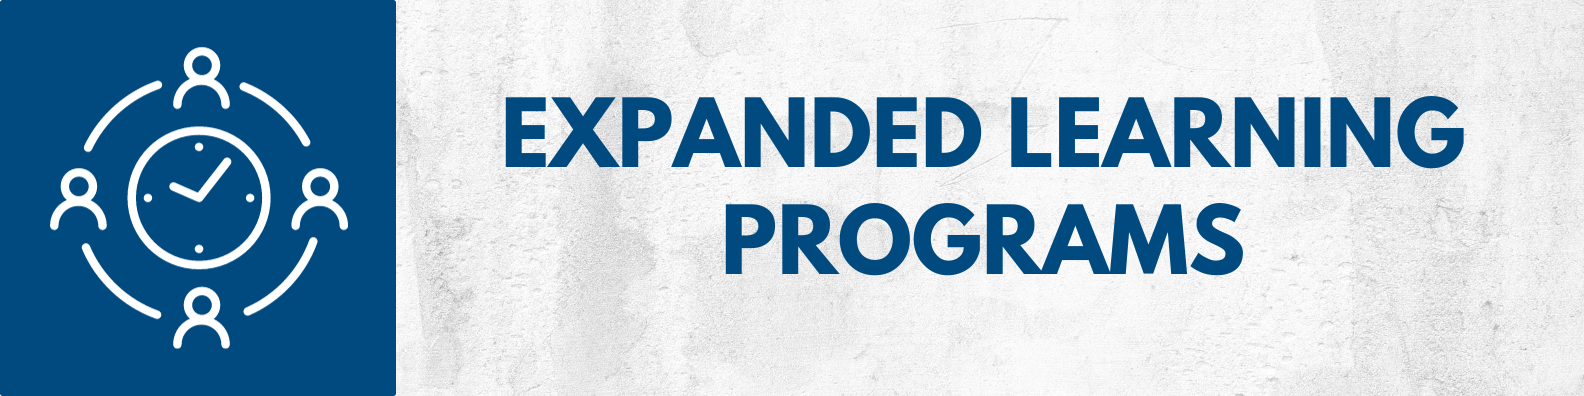 Expanded Learning Programs, click to learn more